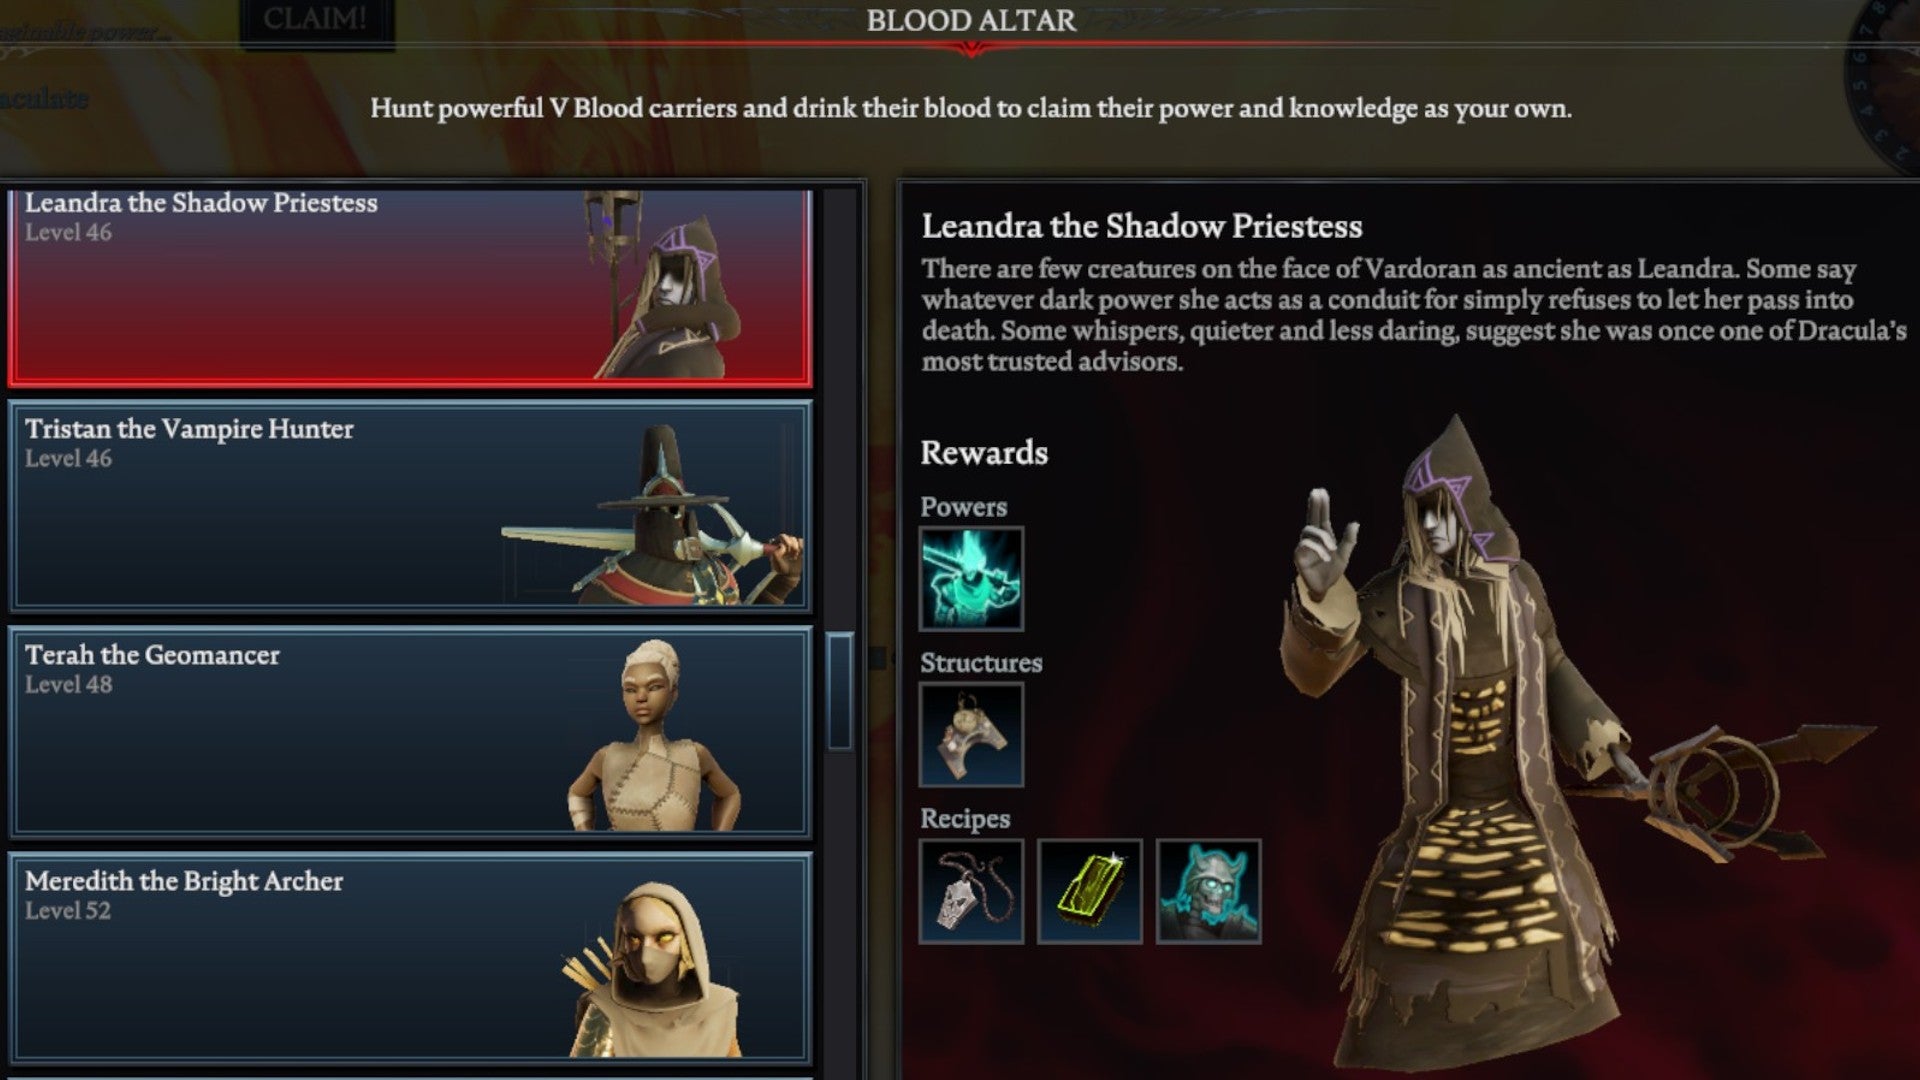 V Rising Leandra the Shadow Priestess Blood Altar tracking page, showing an image of the cloaked mage on the right and a list of bosses on the left